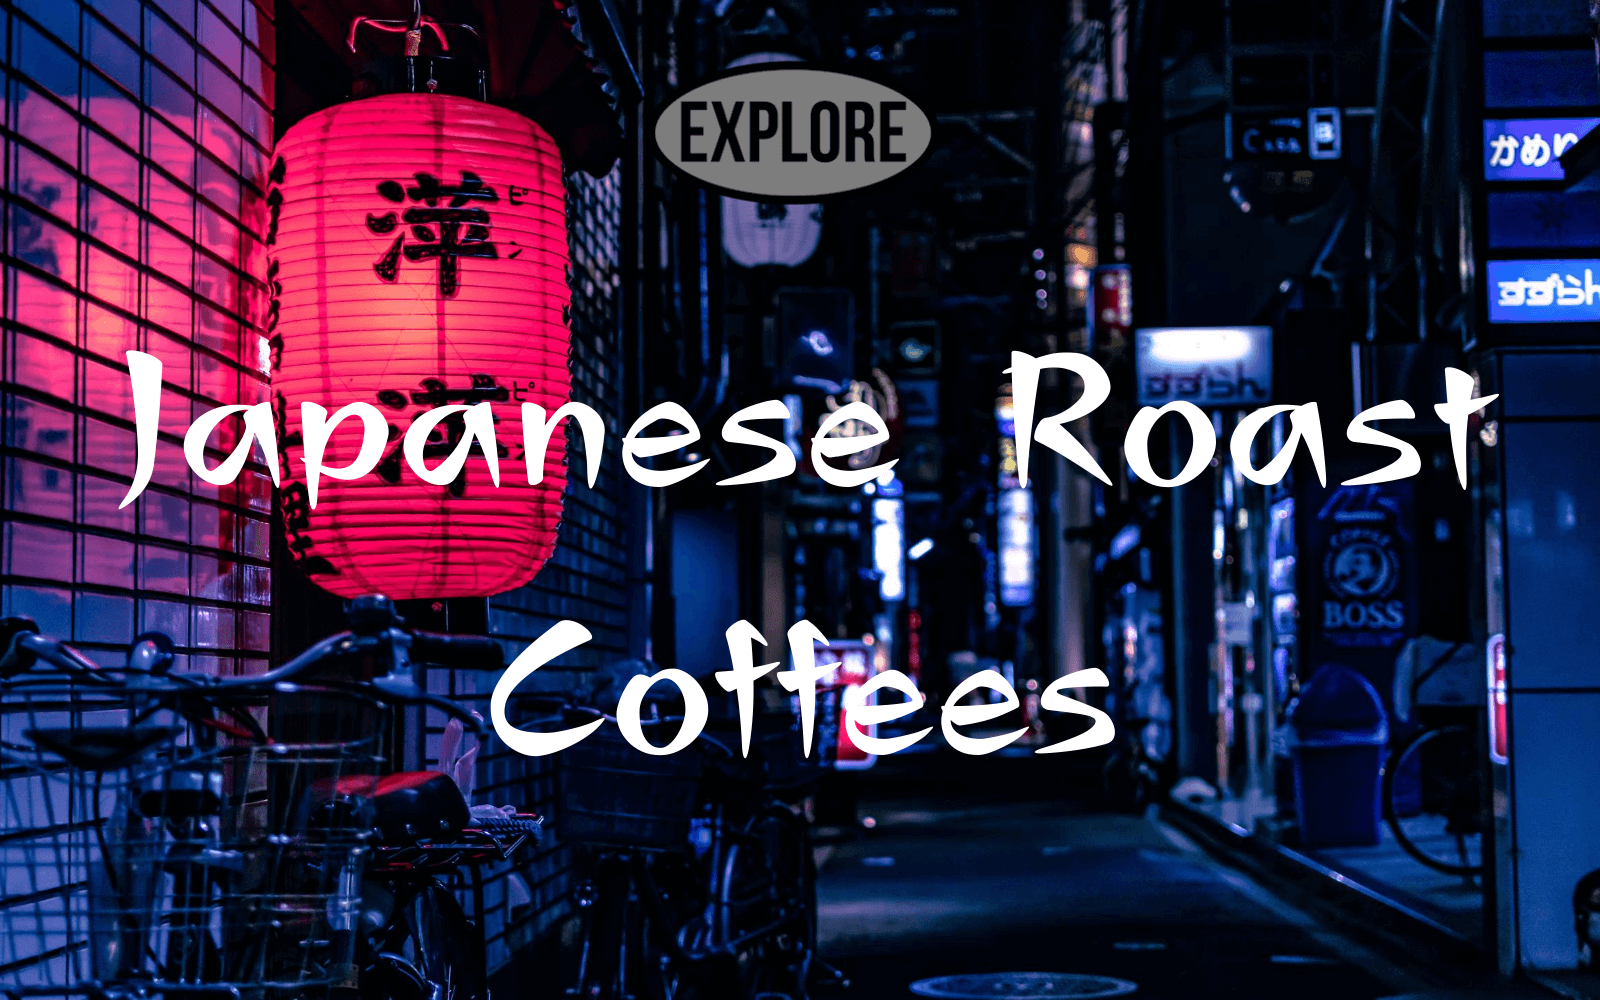 Darker than an American roast and typically removing the bitters and leaving a sweet, mellow, rich but clean coffee Japanese roast coffees offered by Out Of The Grey Coffee are 100% delicious.